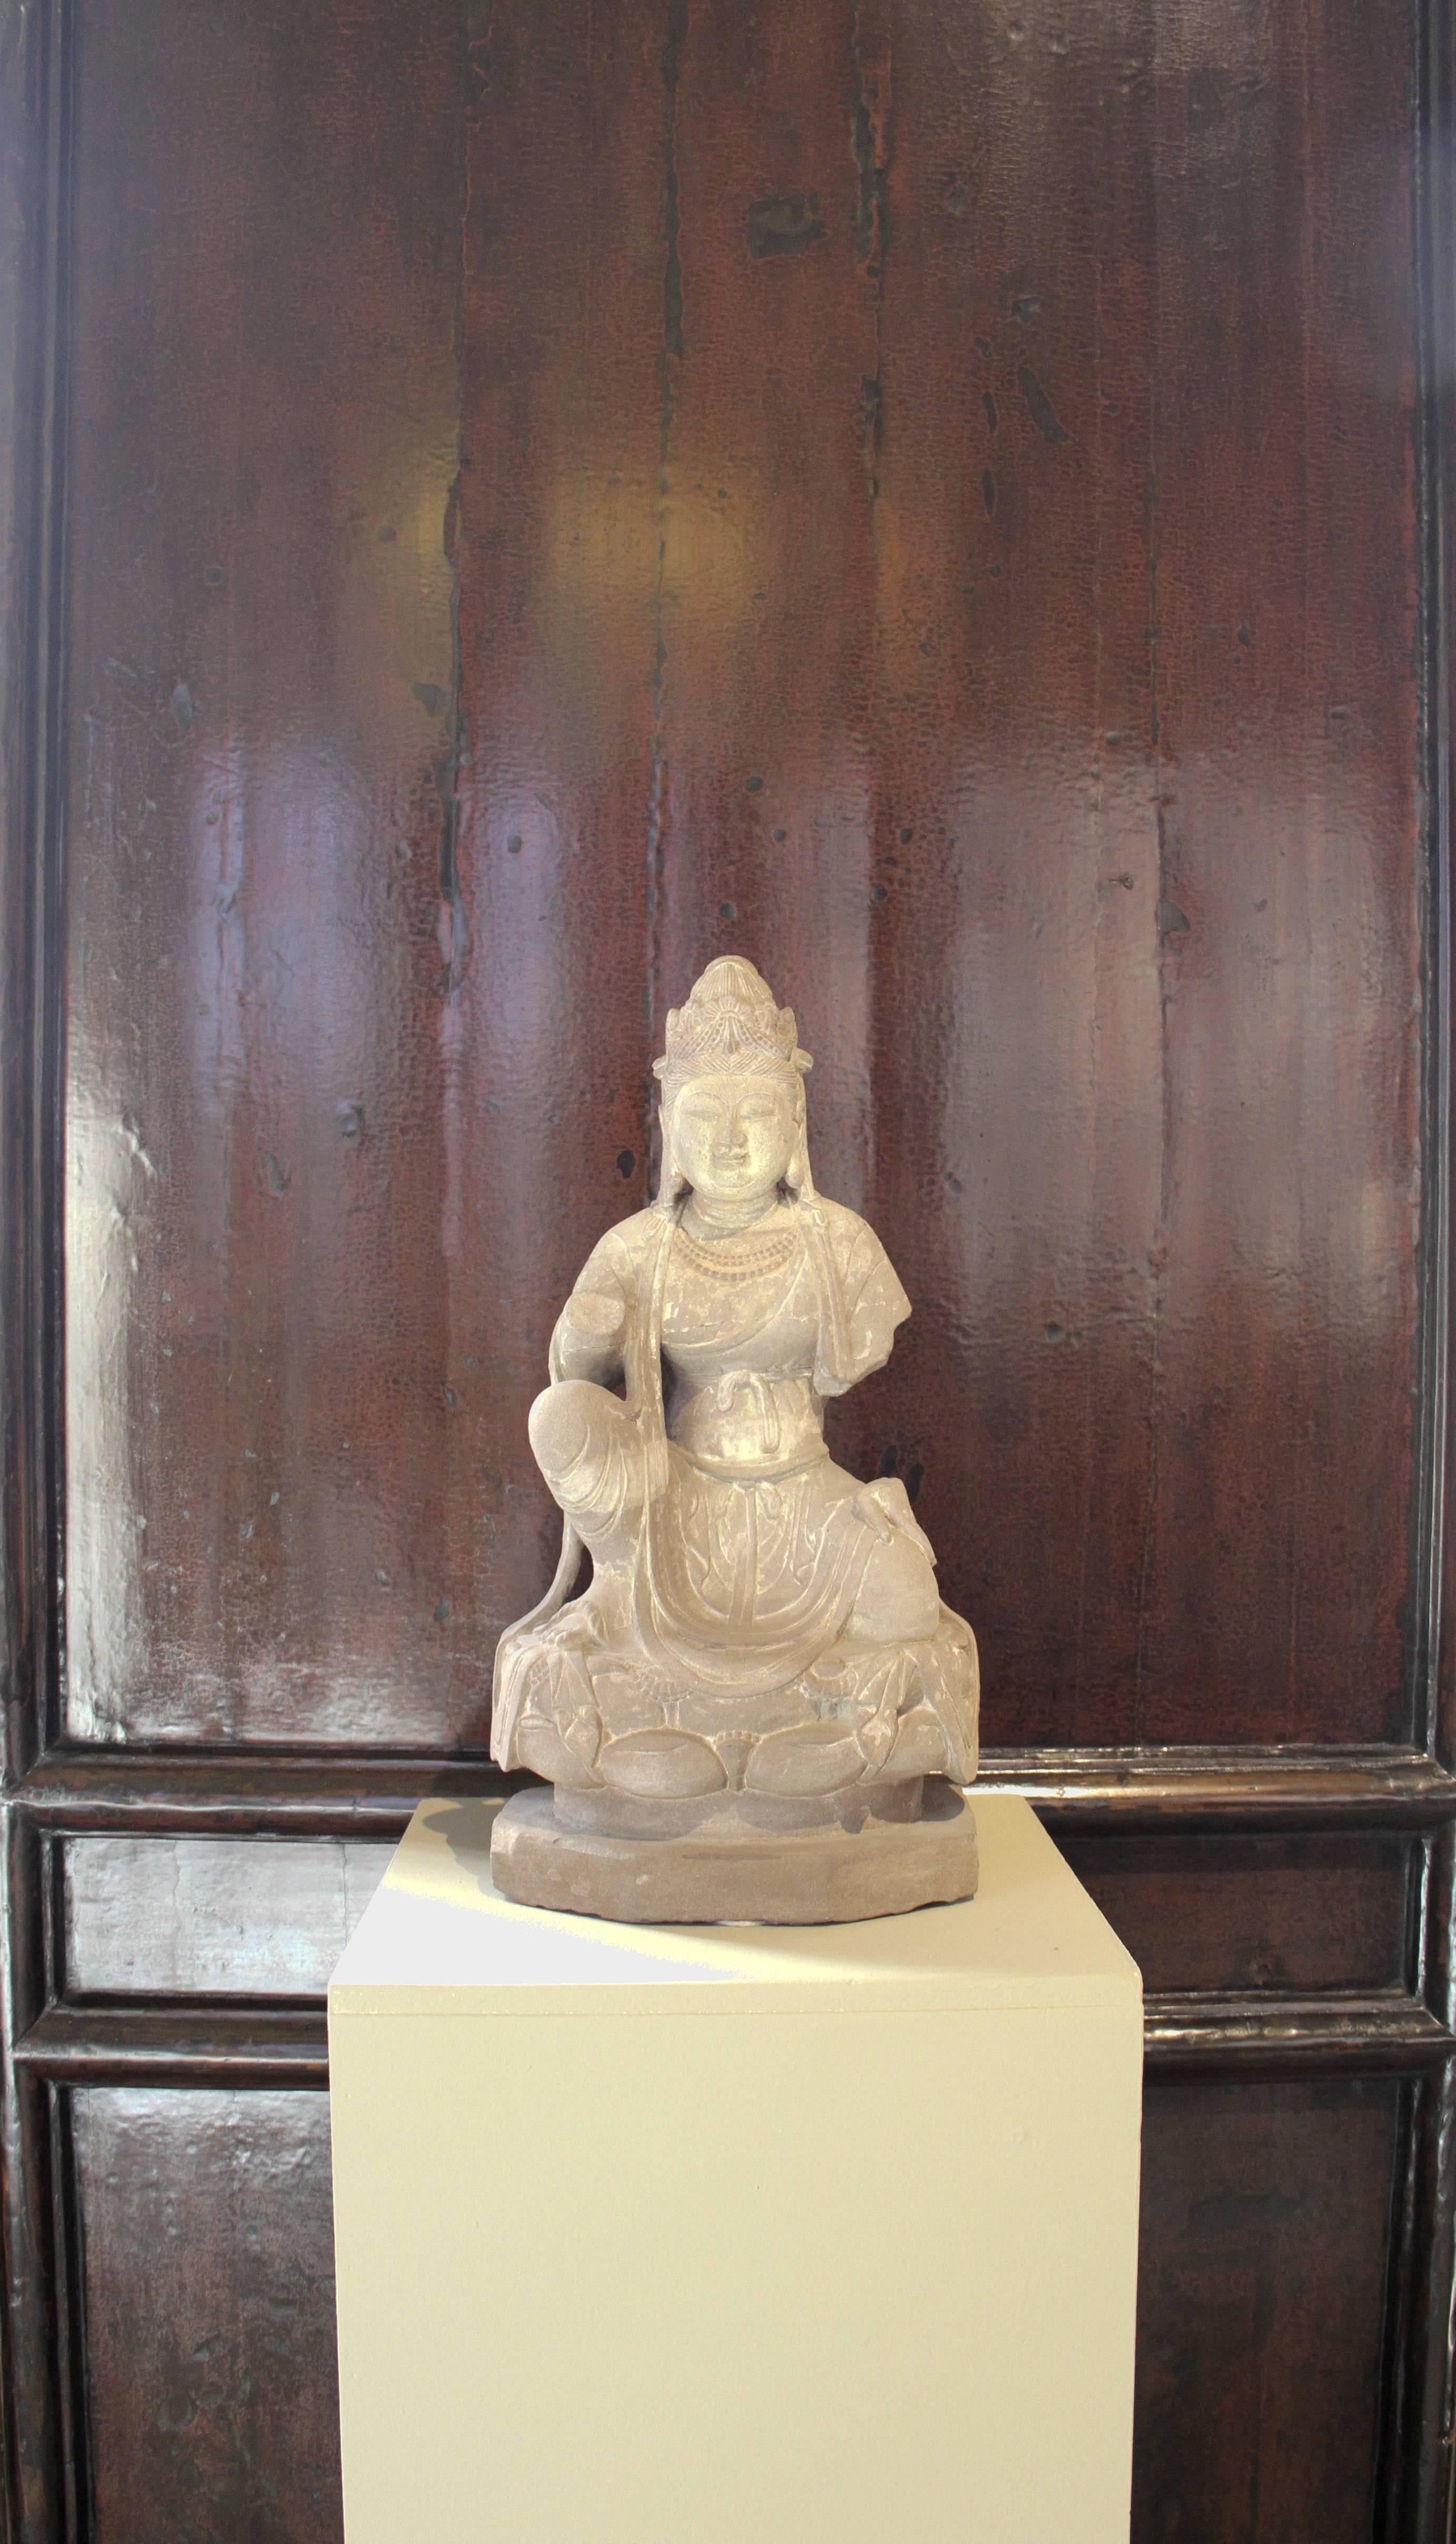 This sandstone Bodhisattva kneeling above a lotus plinth, traces of polychromy is from China, Shanxi province, Tang dynasty and stands 21 inches high. 

In Buddhism, Bodhisattva is the Sanskrit term for anyone who, motivated by great compassion,